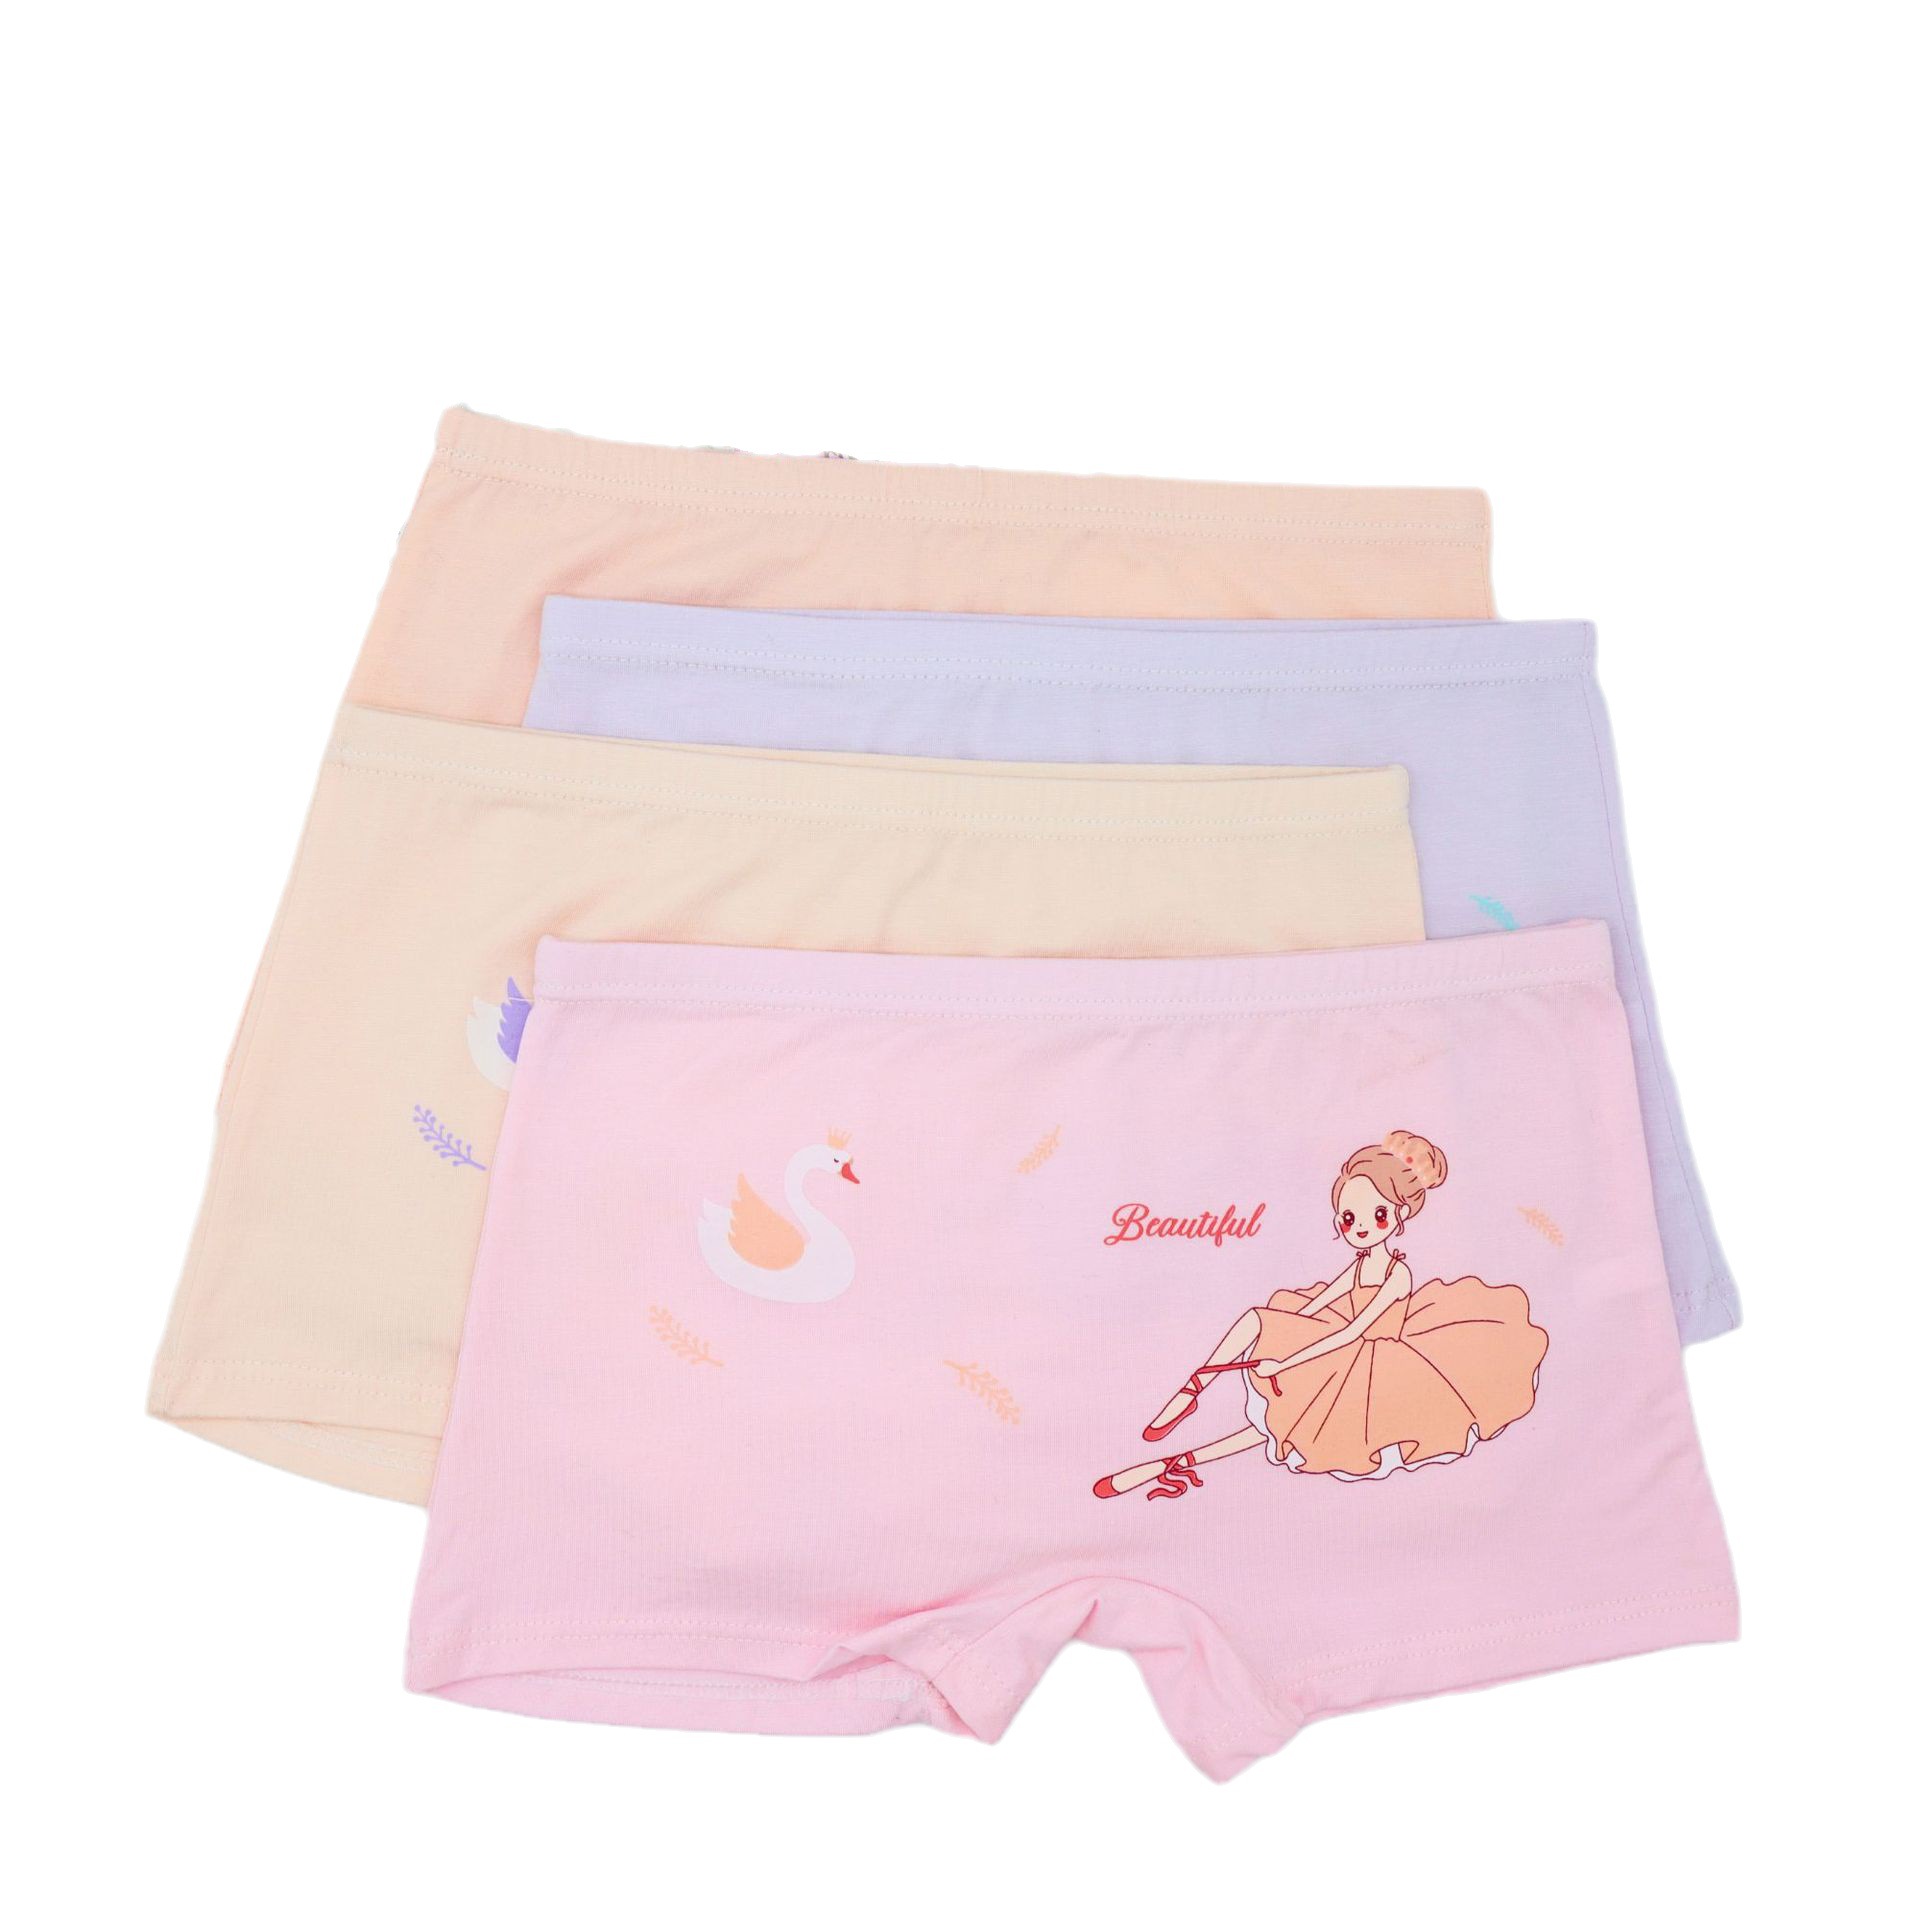 New children's printed RC cotton soft and comfortable without clamping PP wholesale stock boxer briefs